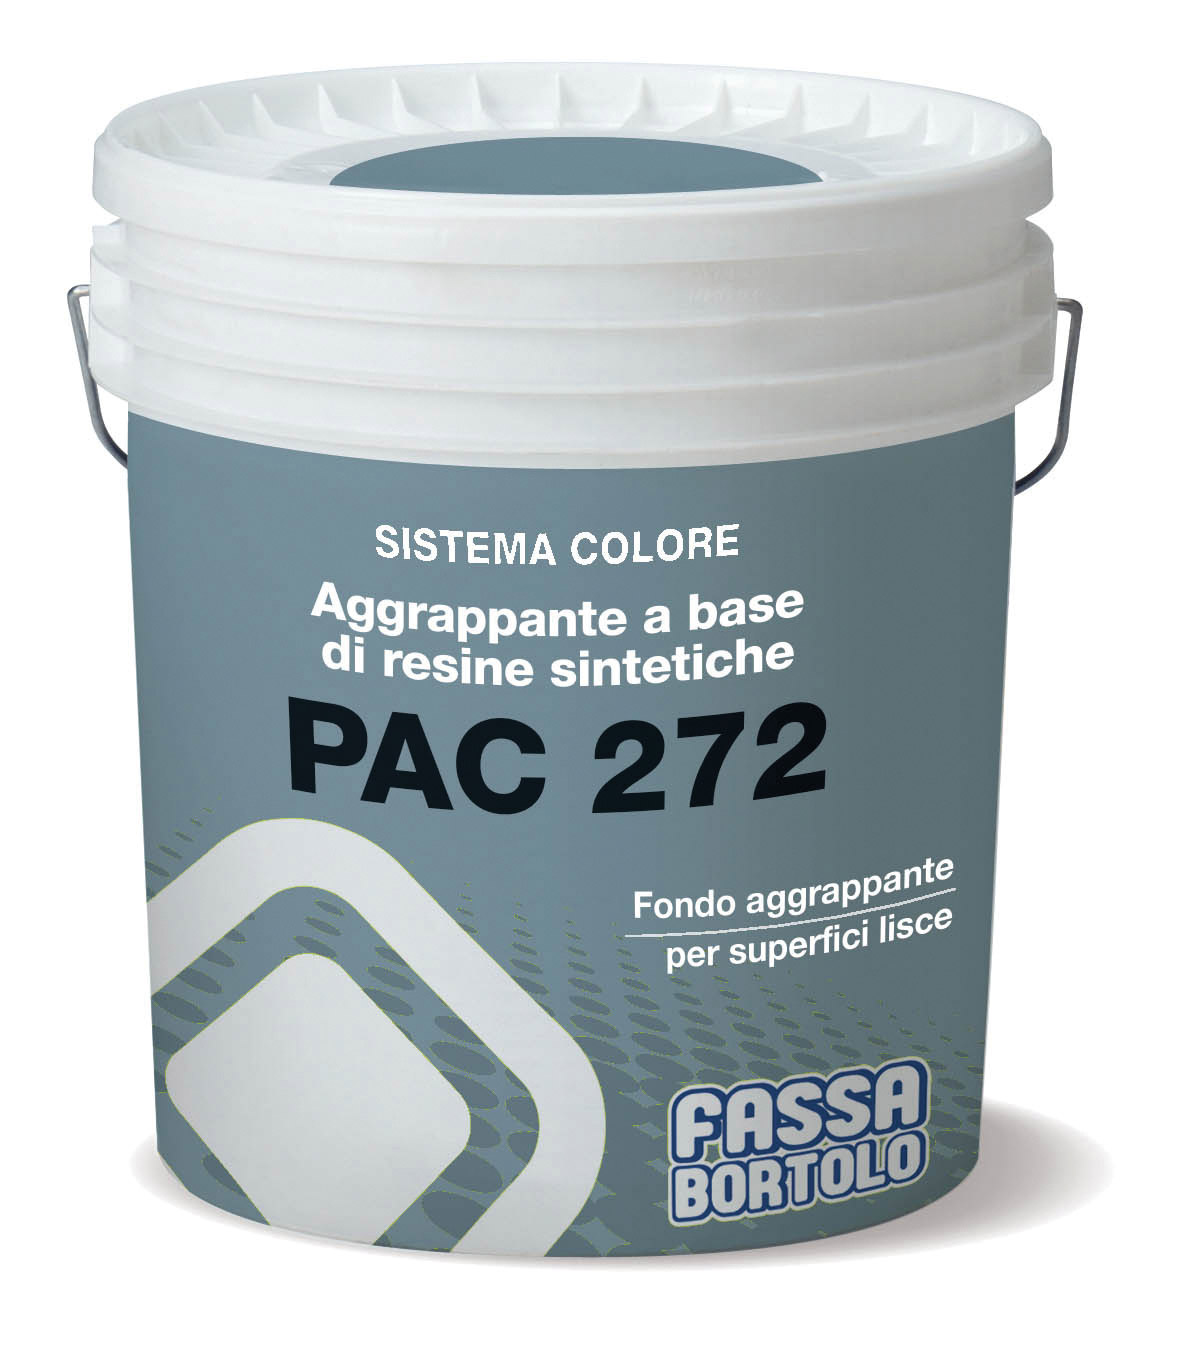 PAC 272: Bonding primer made of synthetic resins for gypsum based and lime-gypsum based plasters on concrete substrates